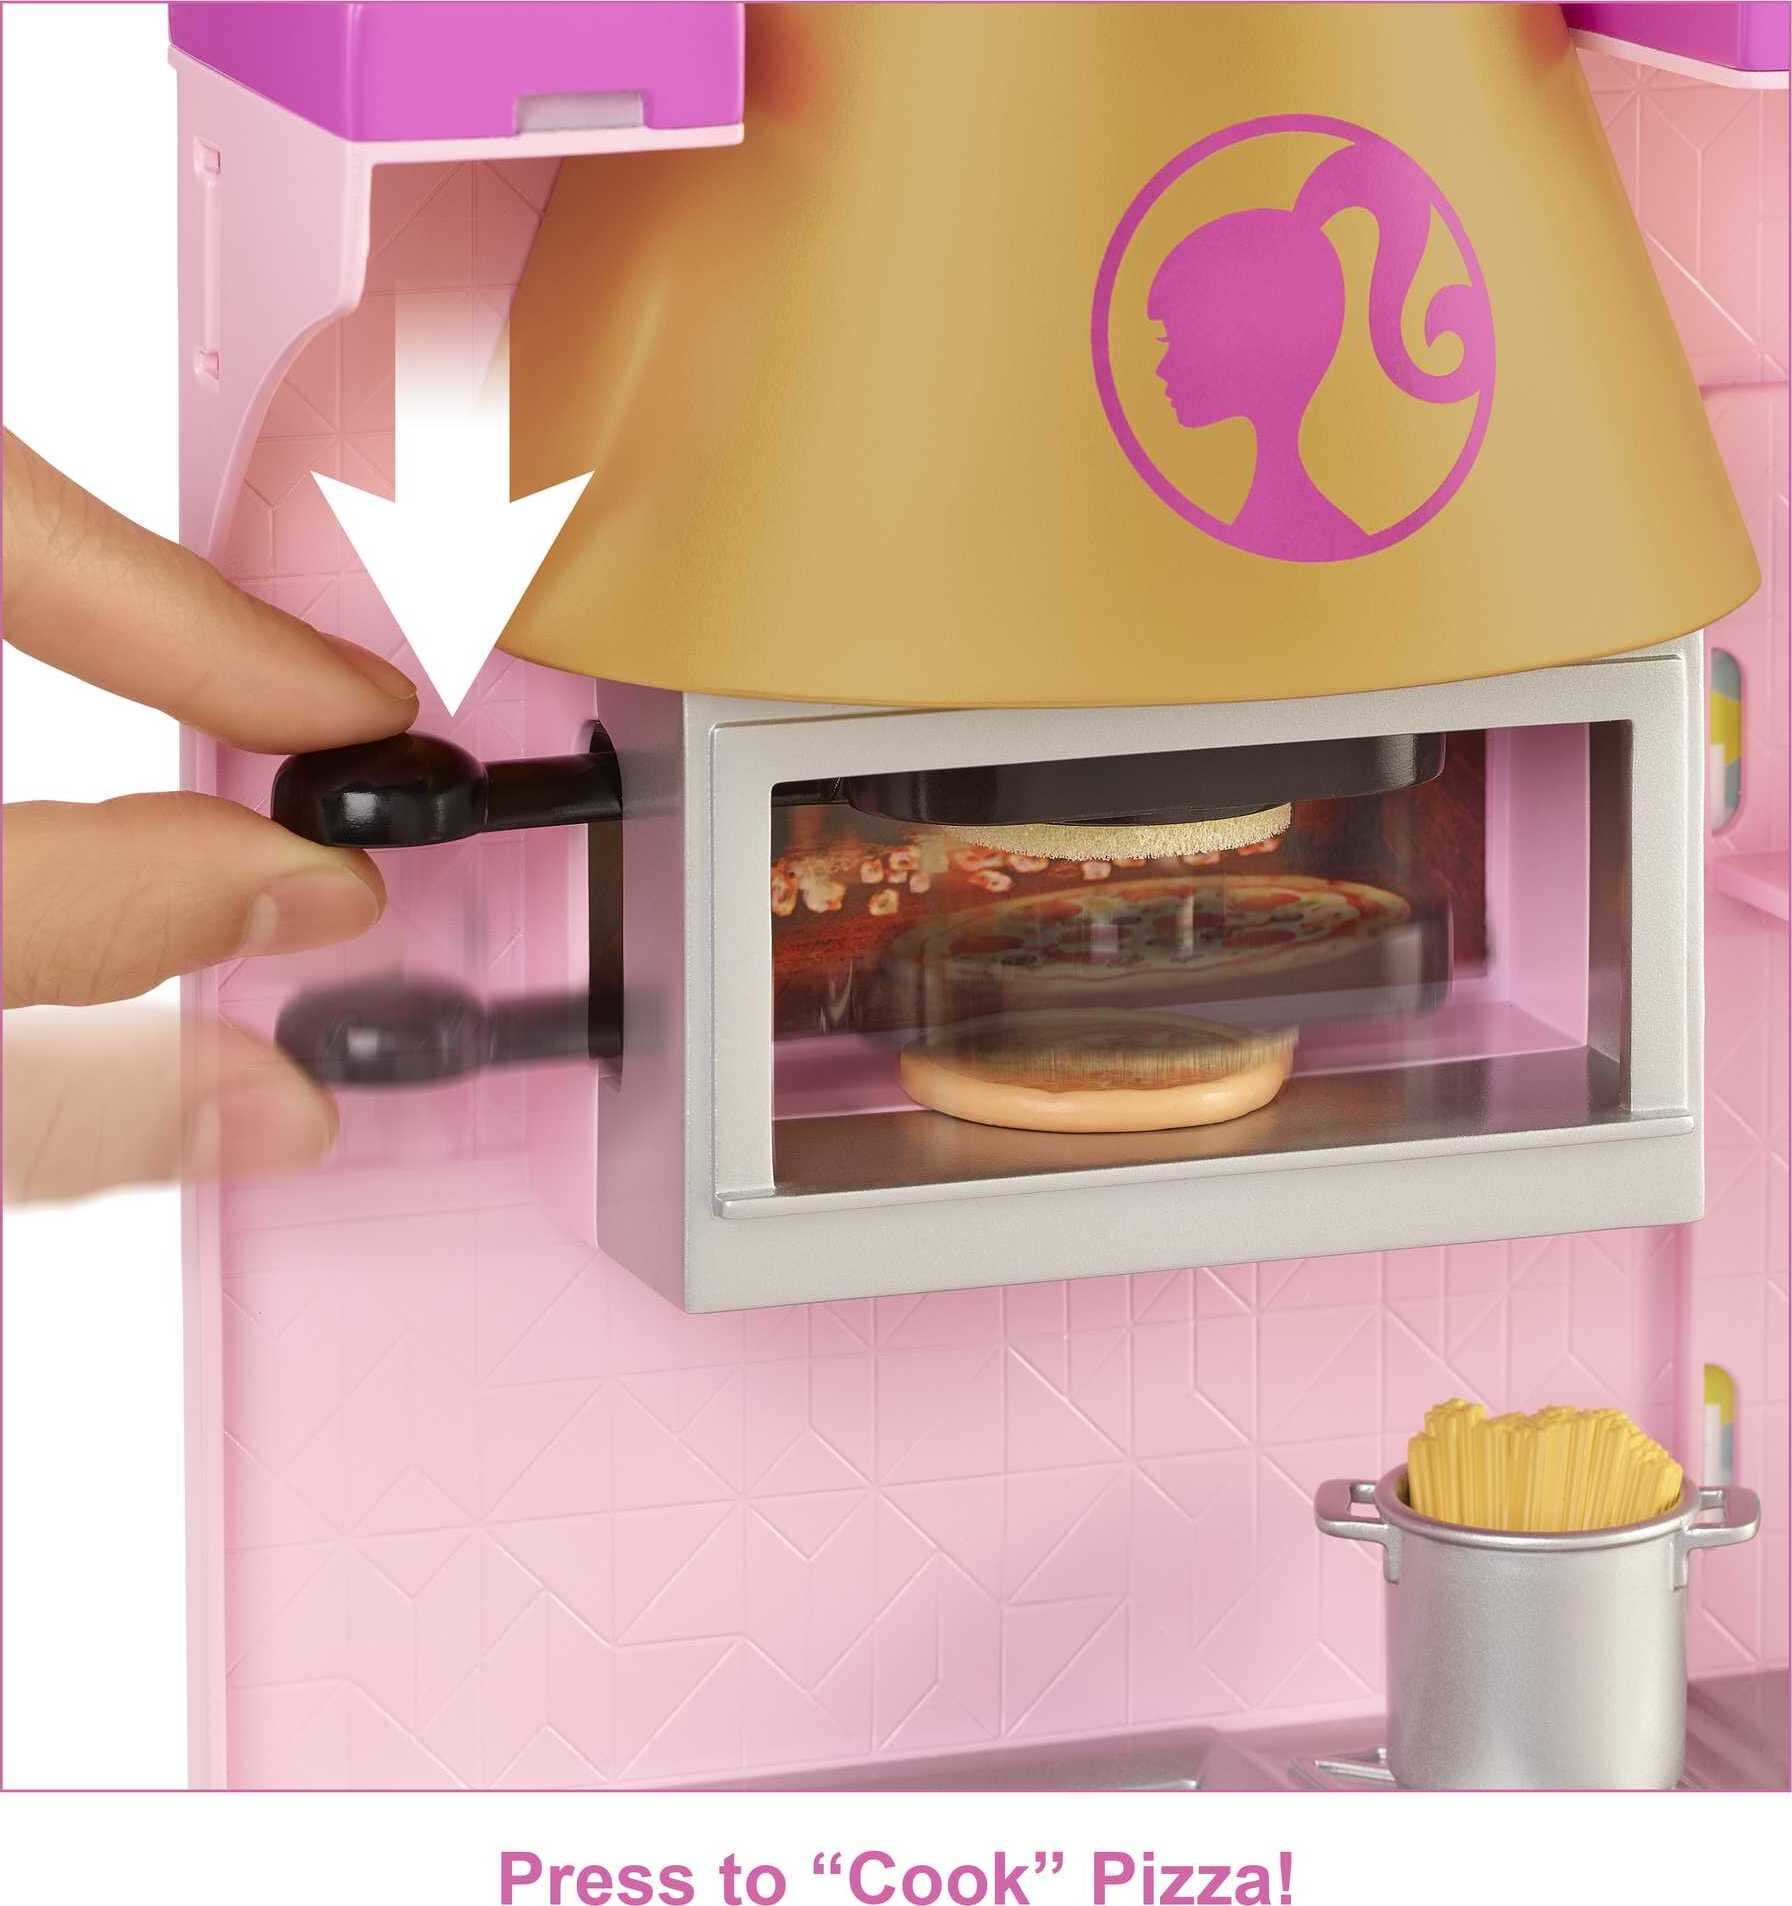  Barbie Doll & Playset, Cook 'n Grill Restaurant with Pizza Oven  & 30+ Pieces Including Furniture & Kitchen Accessories : Toys & Games